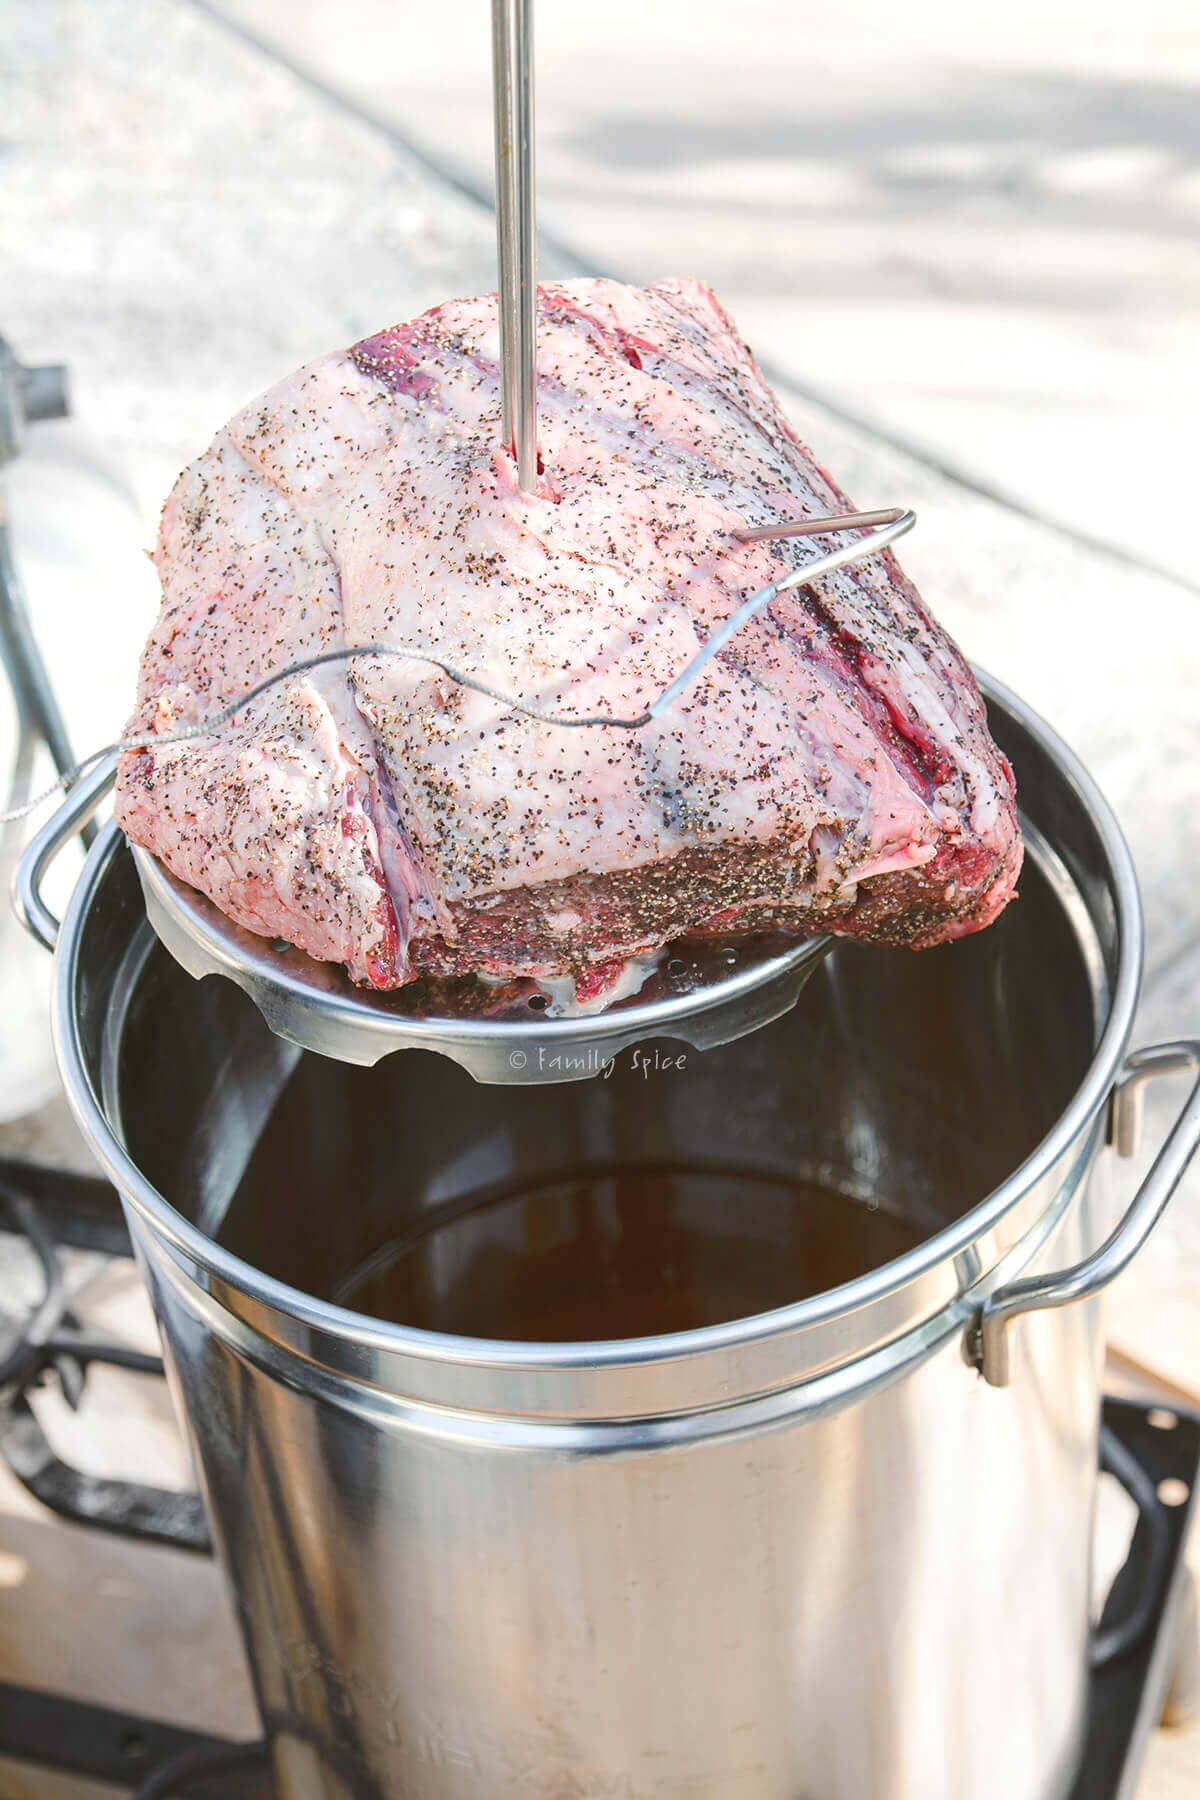 A seasoned rib roast ready to be lowered in the hot oil of a deep fryer